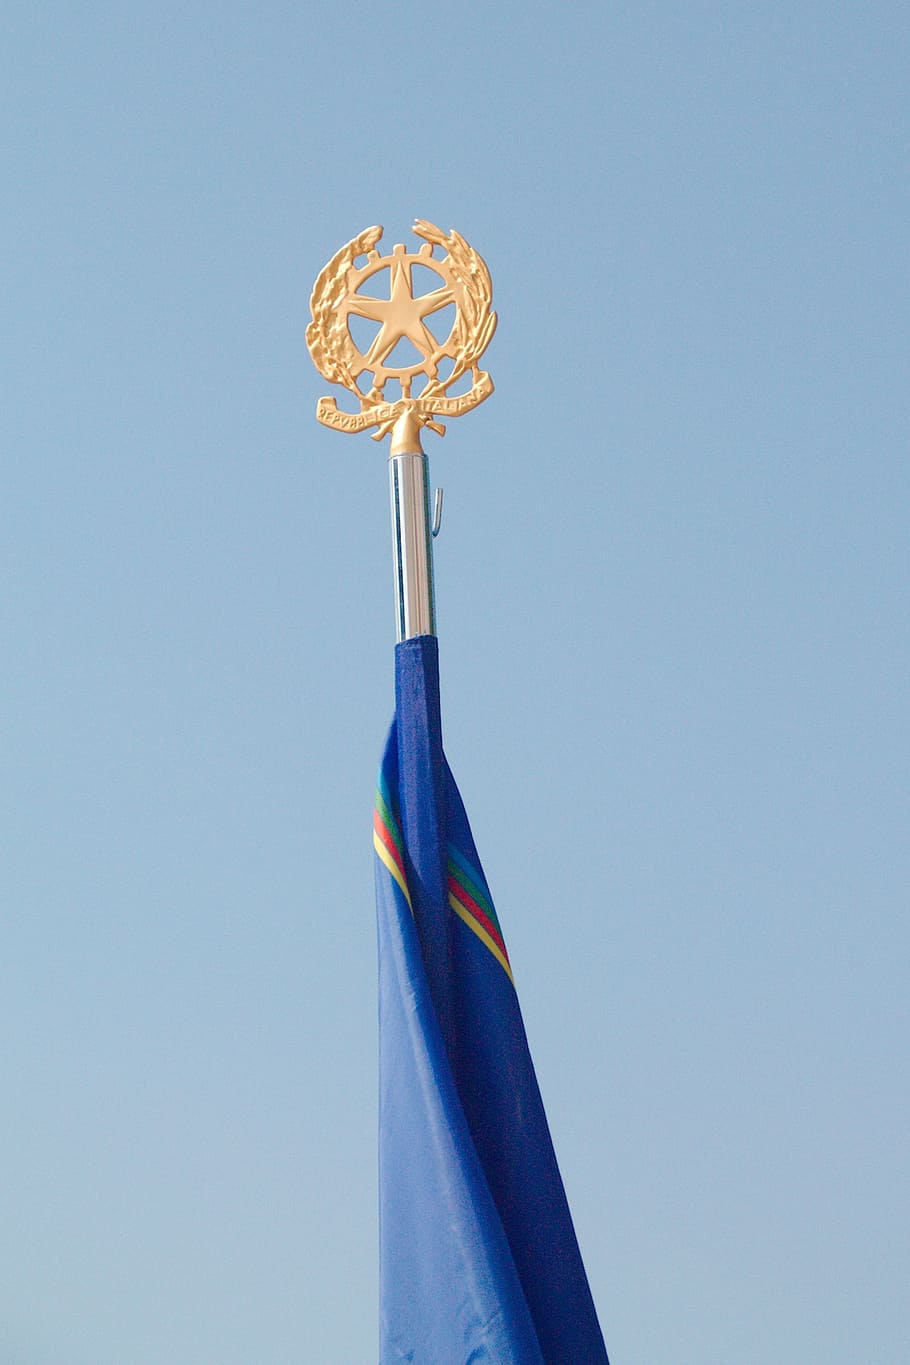 flag, the republic, italiana, coat of arms, blue, low angle view, copy space, multi colored, clear sky, sky